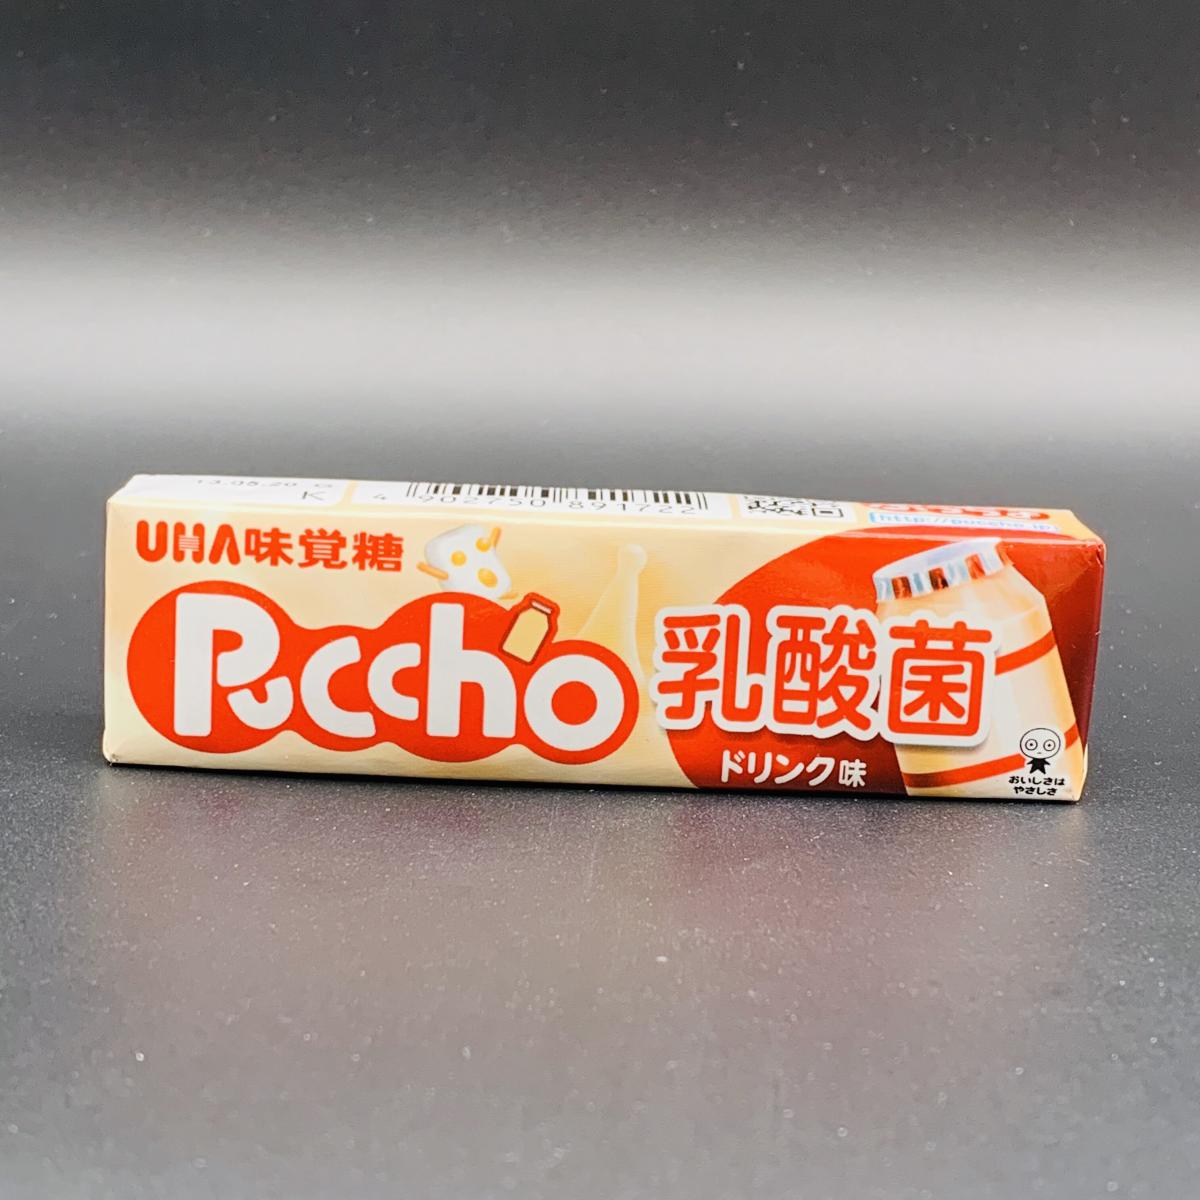 Puccho Stick Candy (Fermented Milk Drink Flavor)